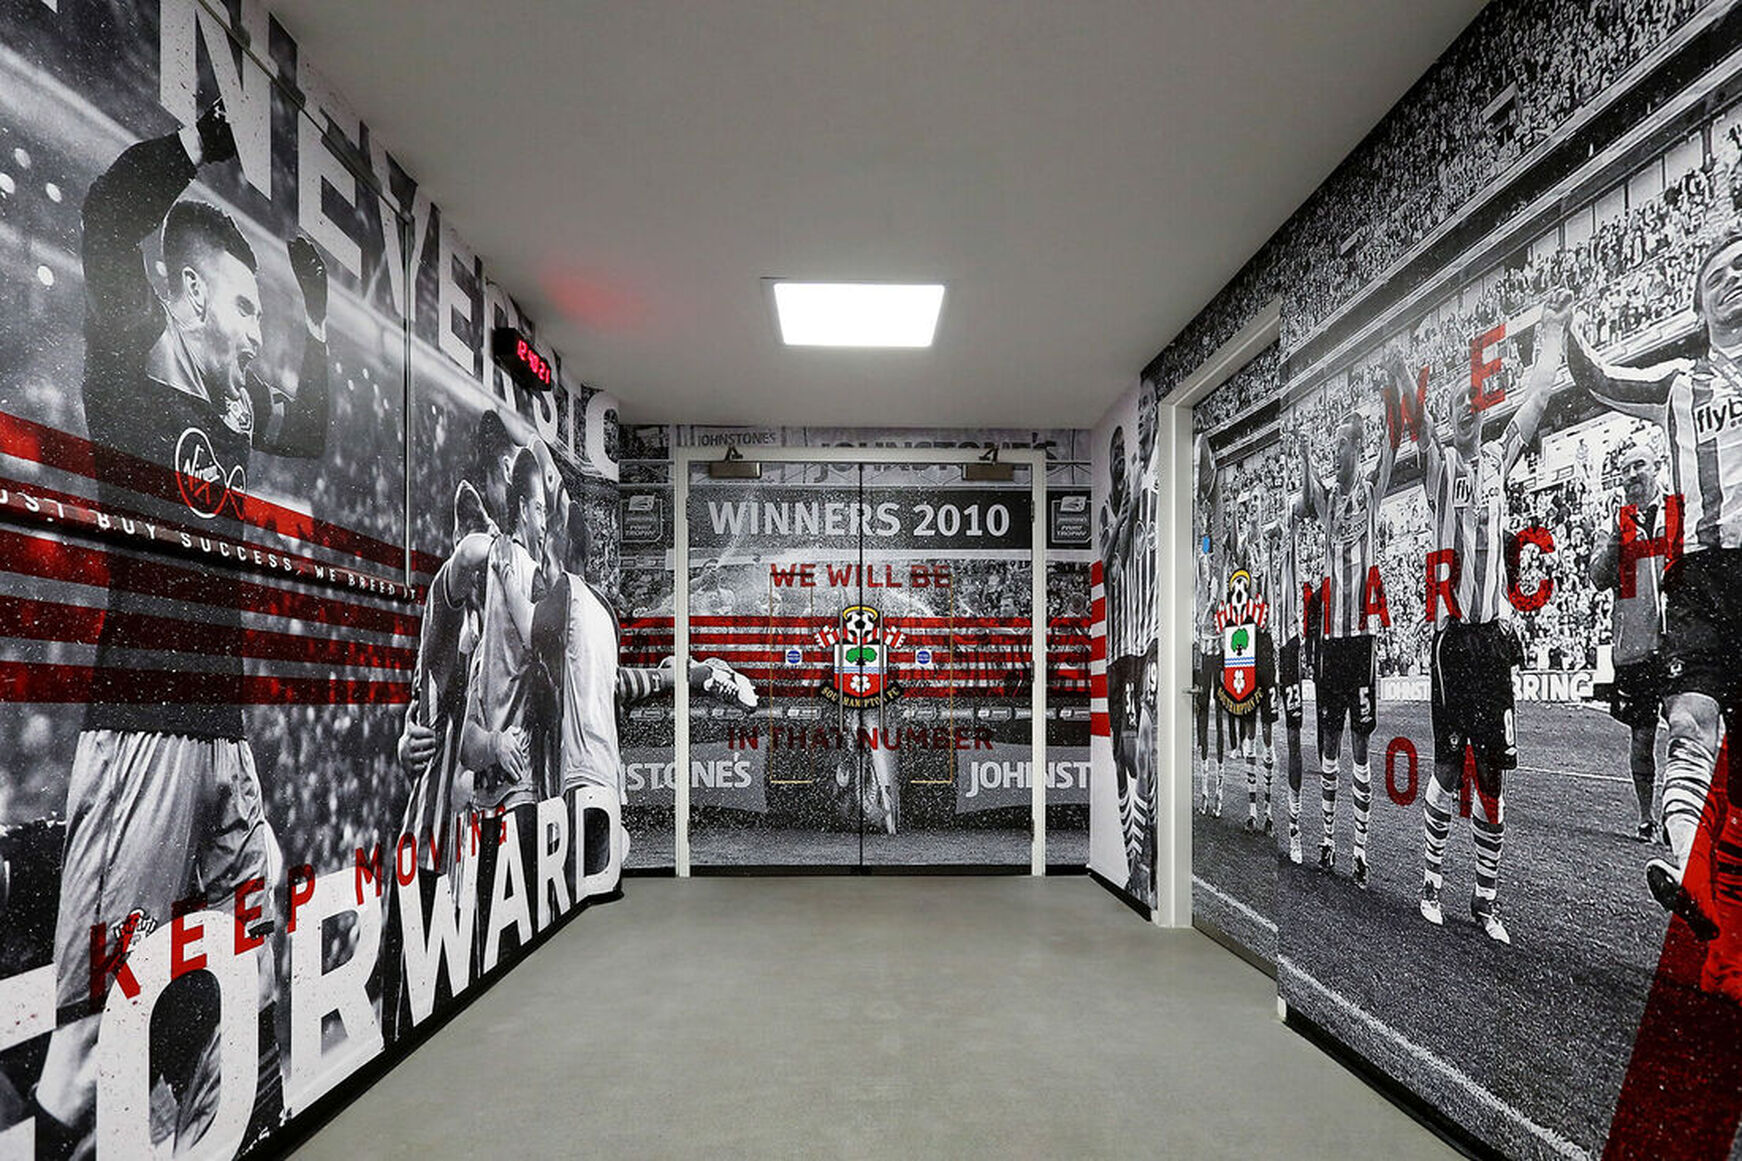 southampton fc artwork on the walls of wembly stadium warm up room